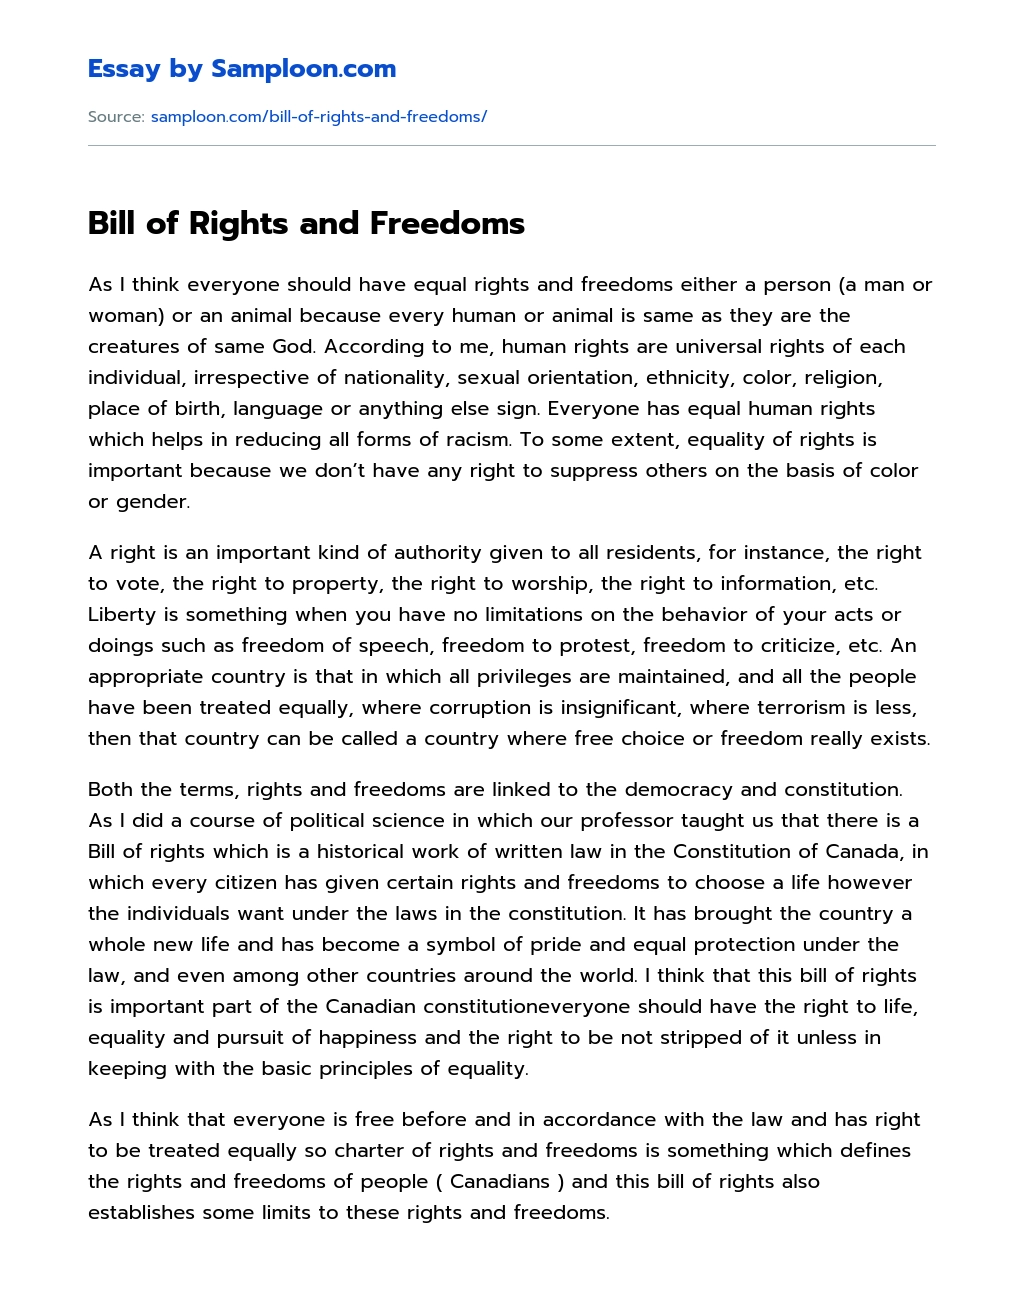 Bill of Rights and Freedoms essay